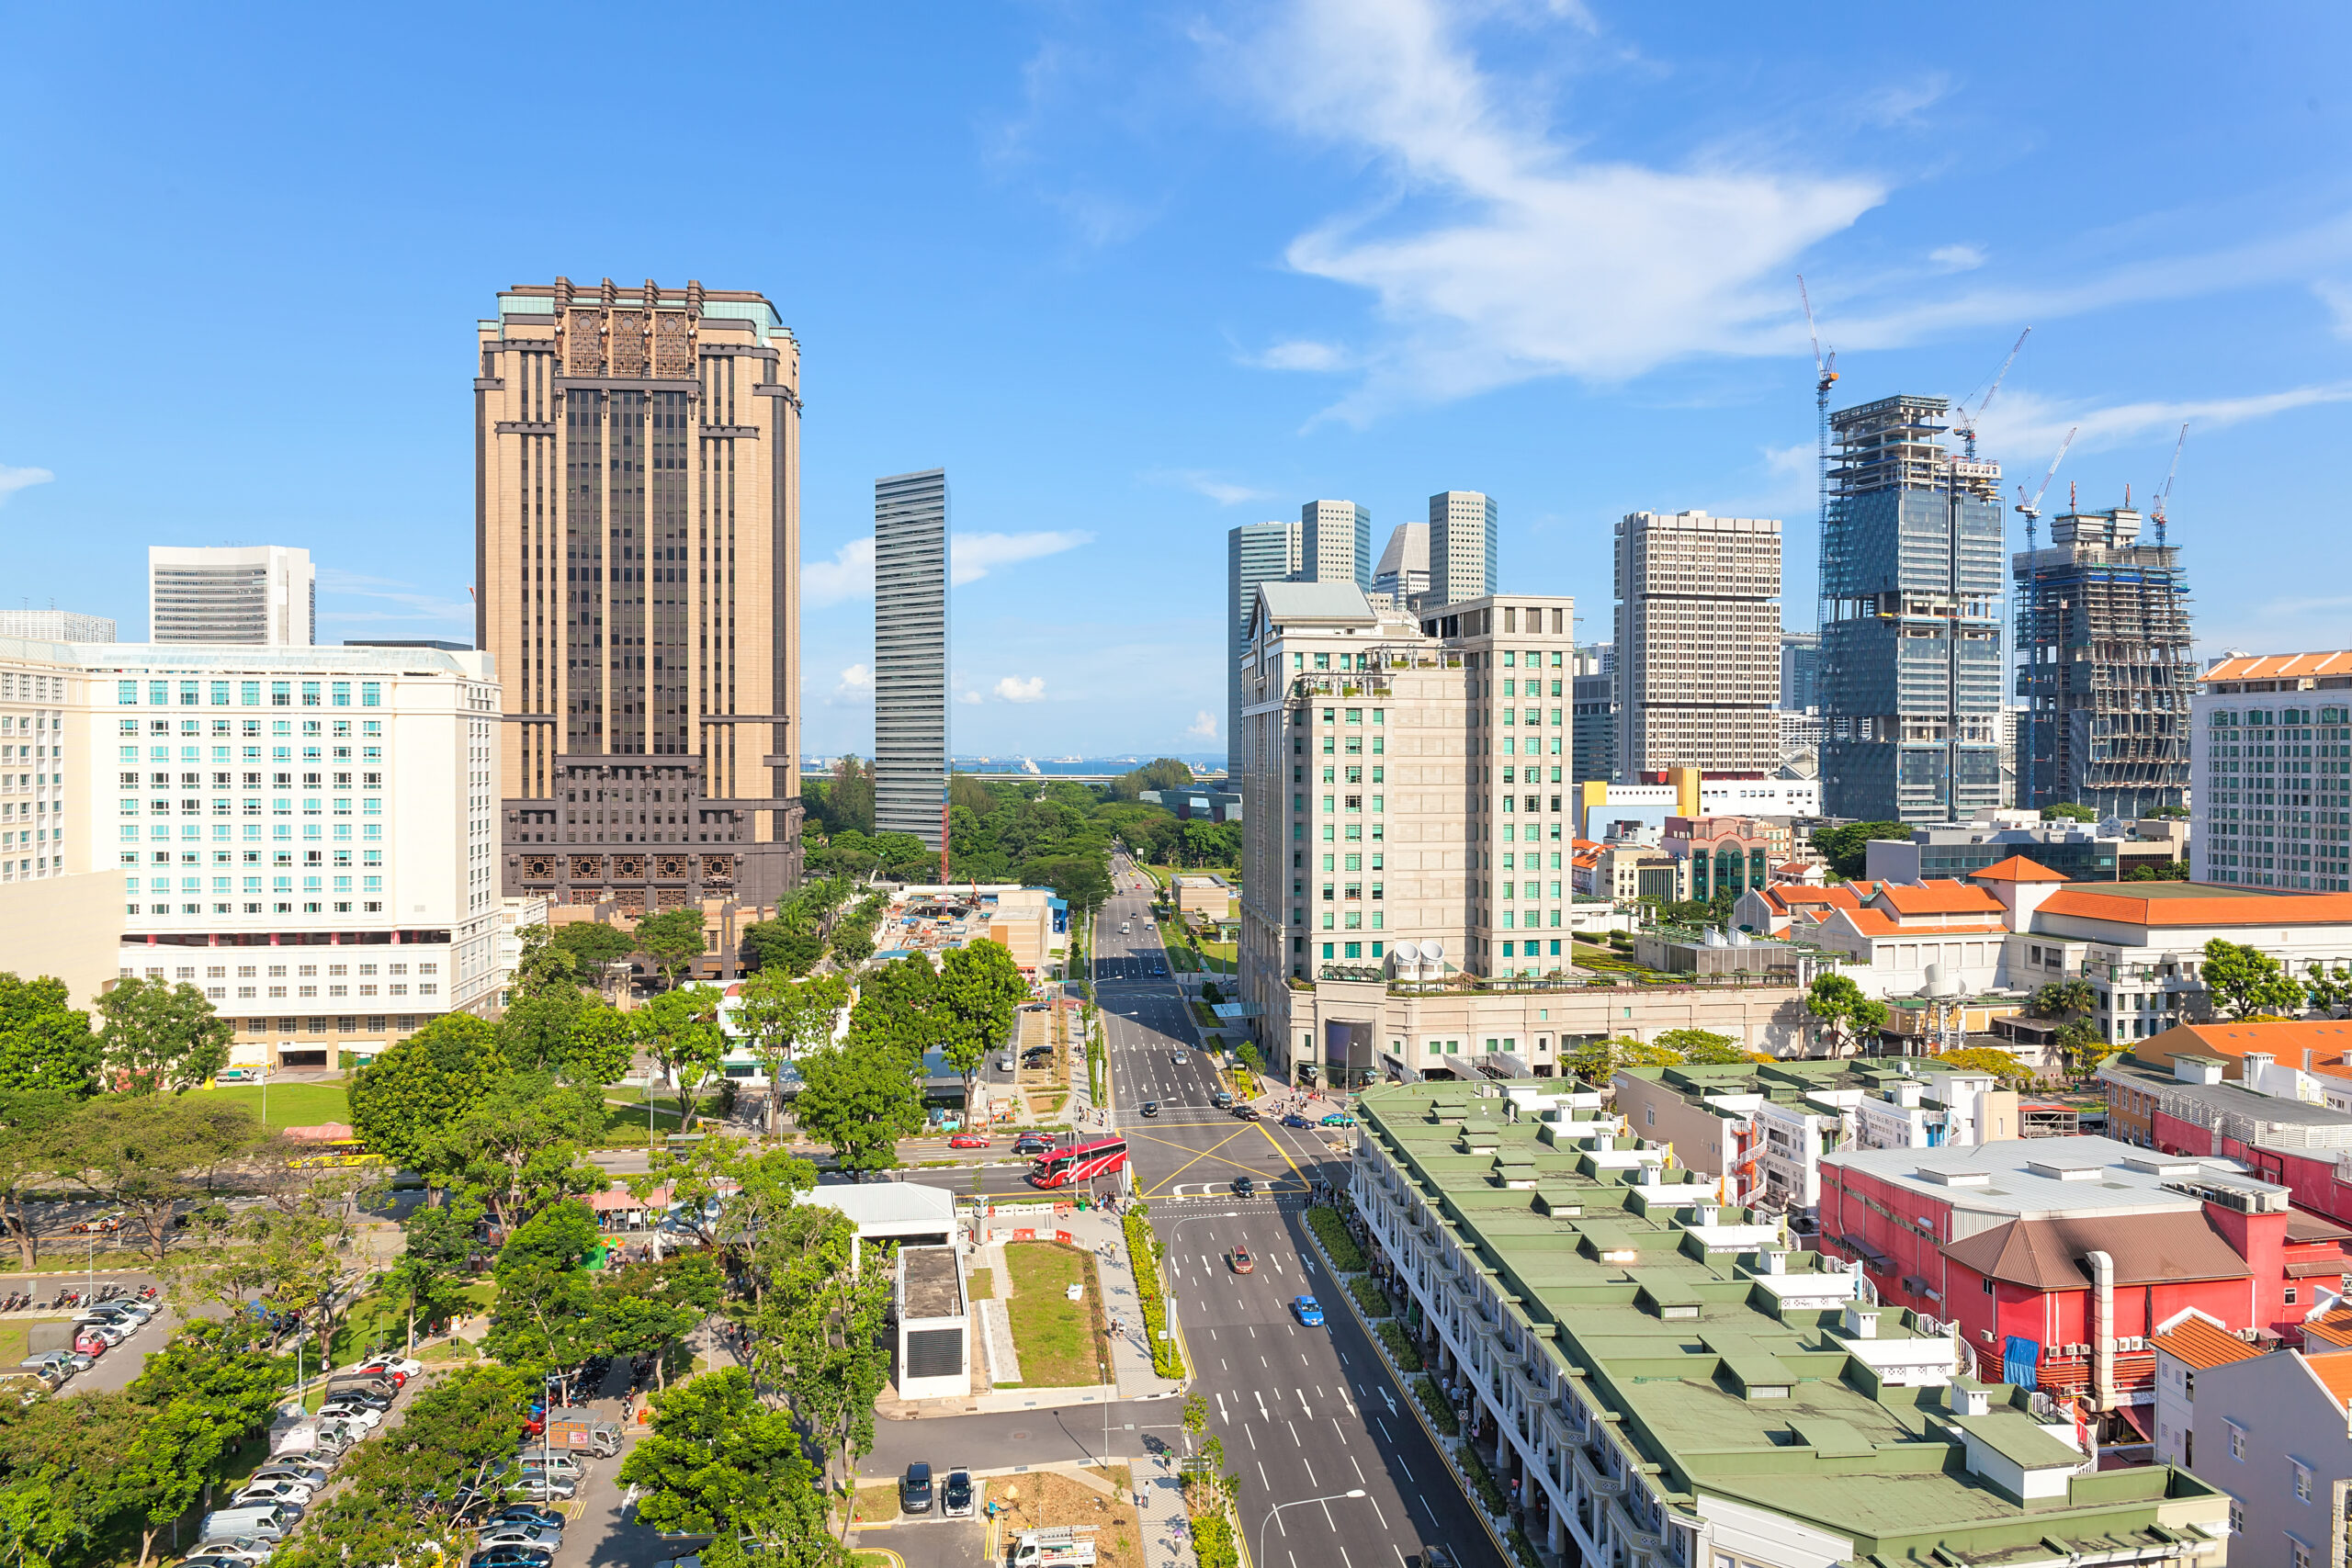 A snapshot of buildings, offices, homes and bustling roads in Bugis area